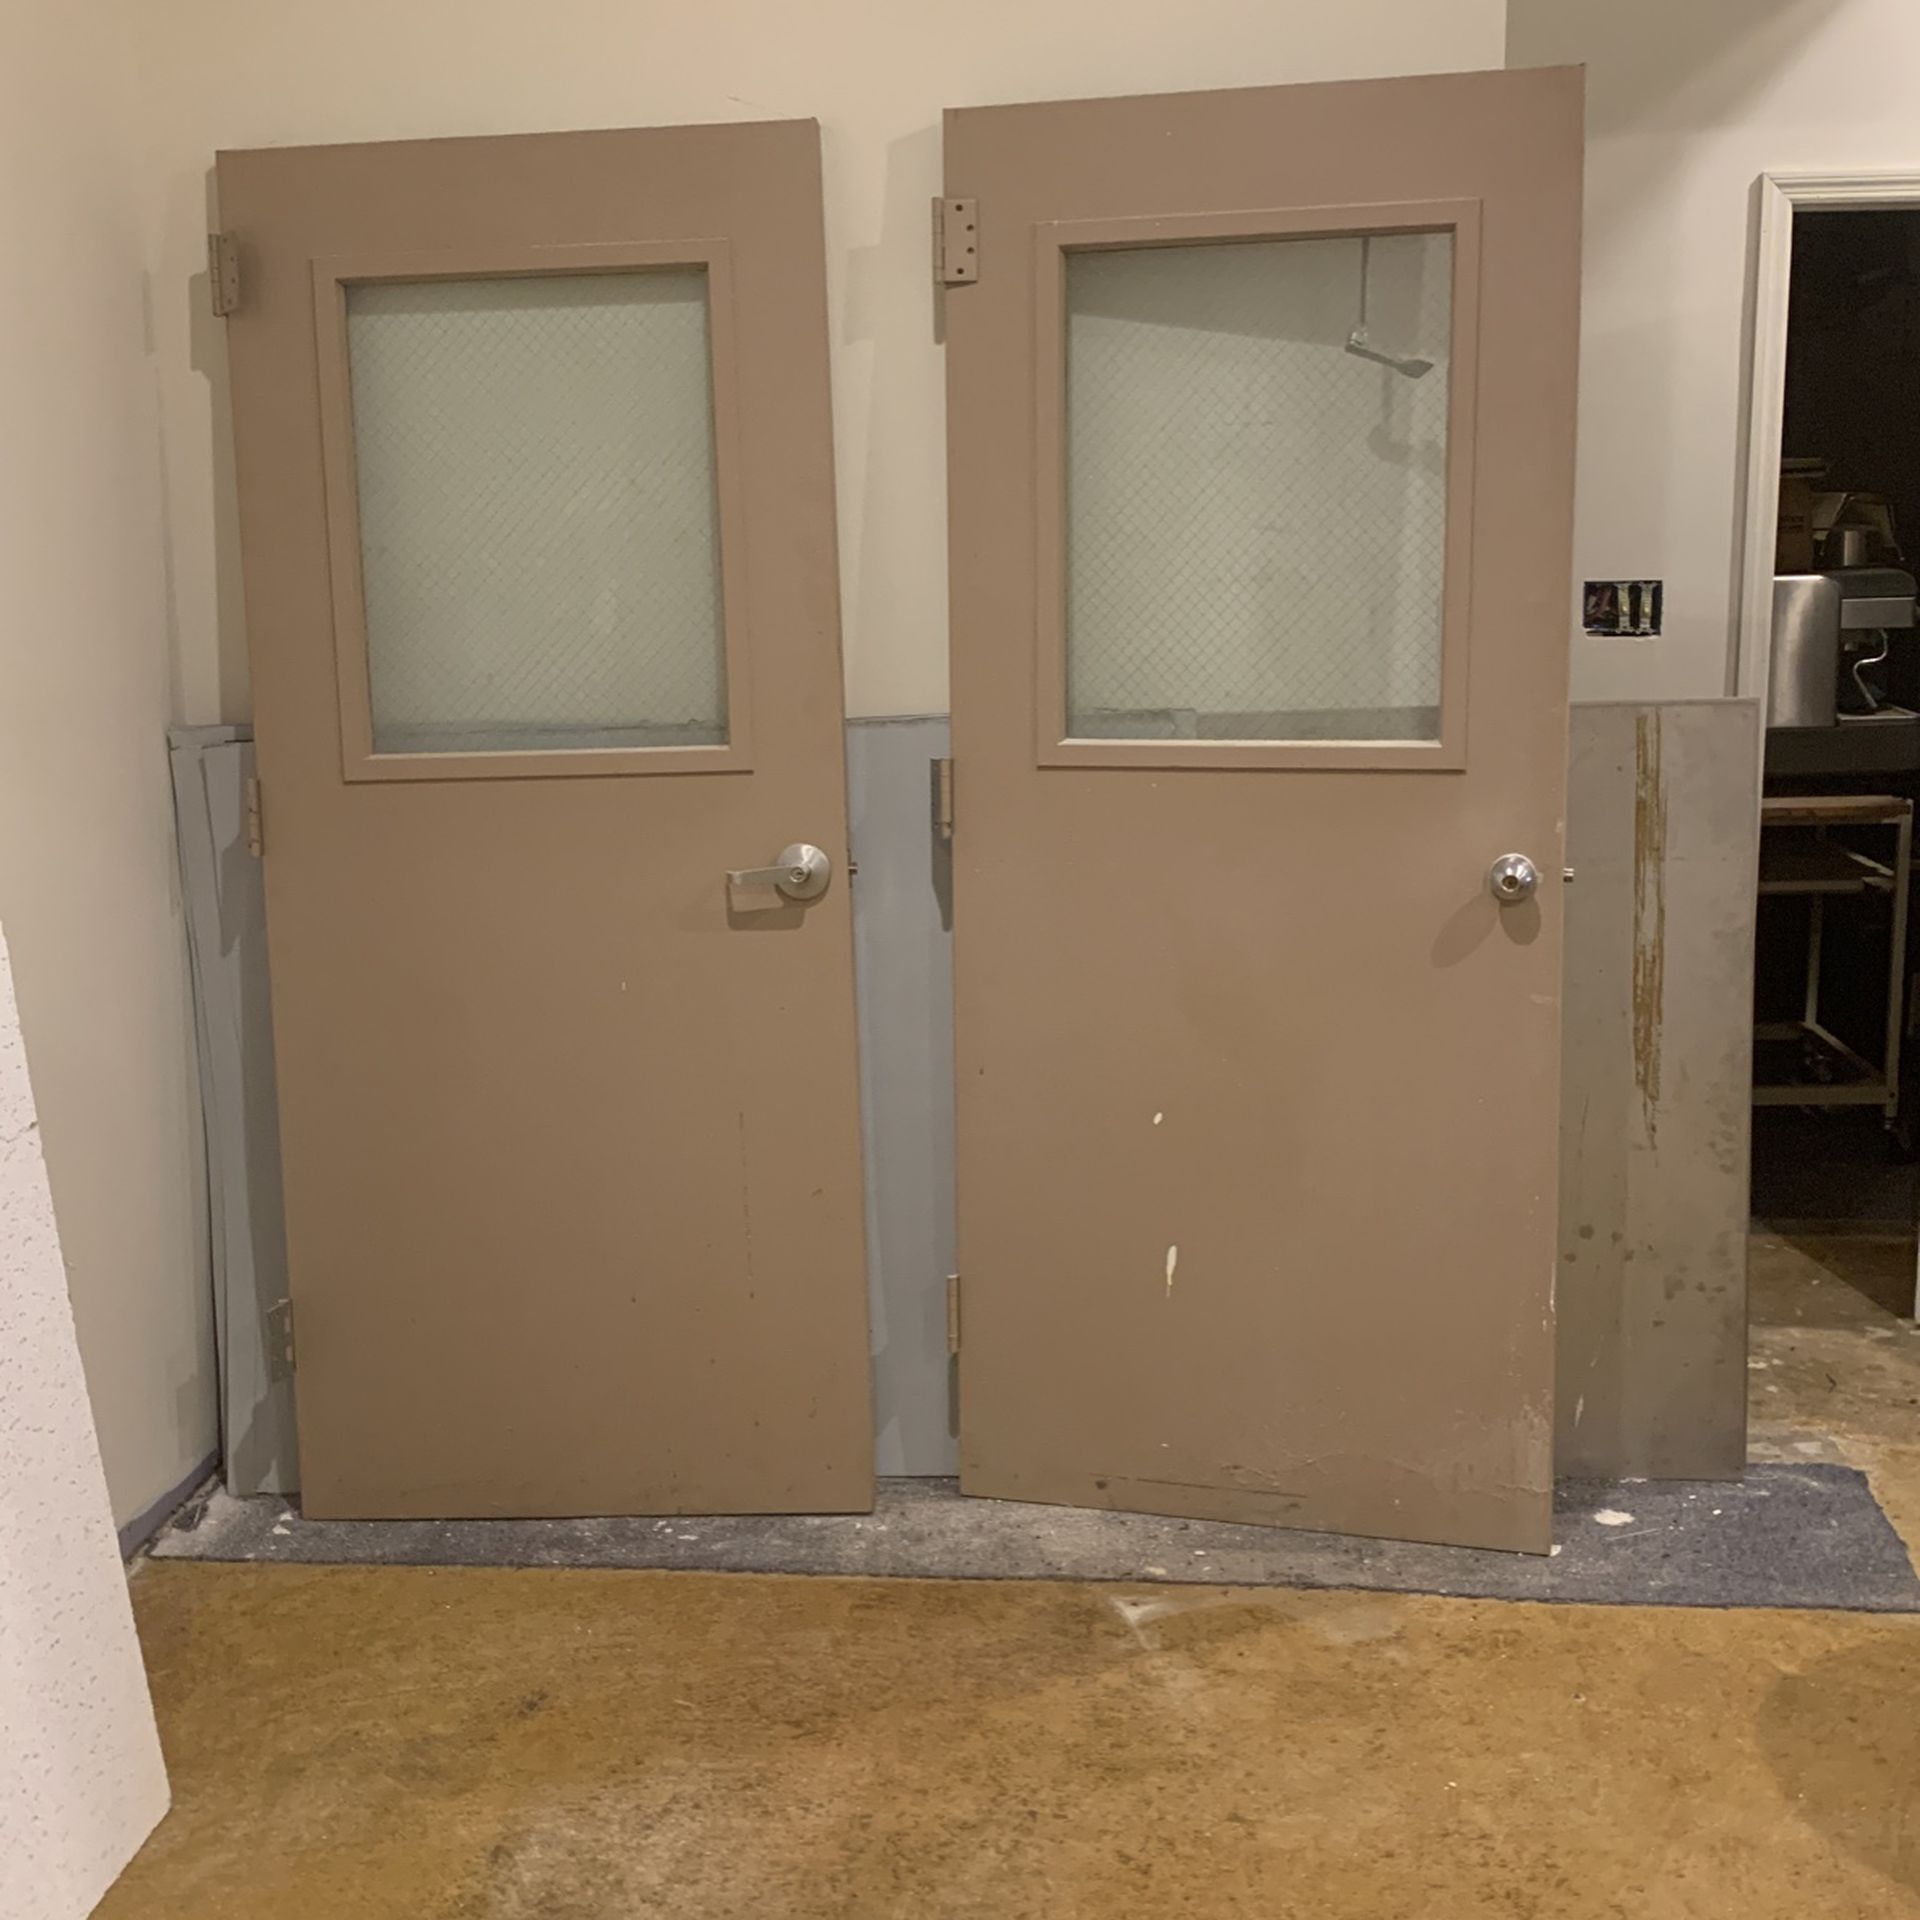 2 36 X 83 Fire Rated Steel Doors With Glass 